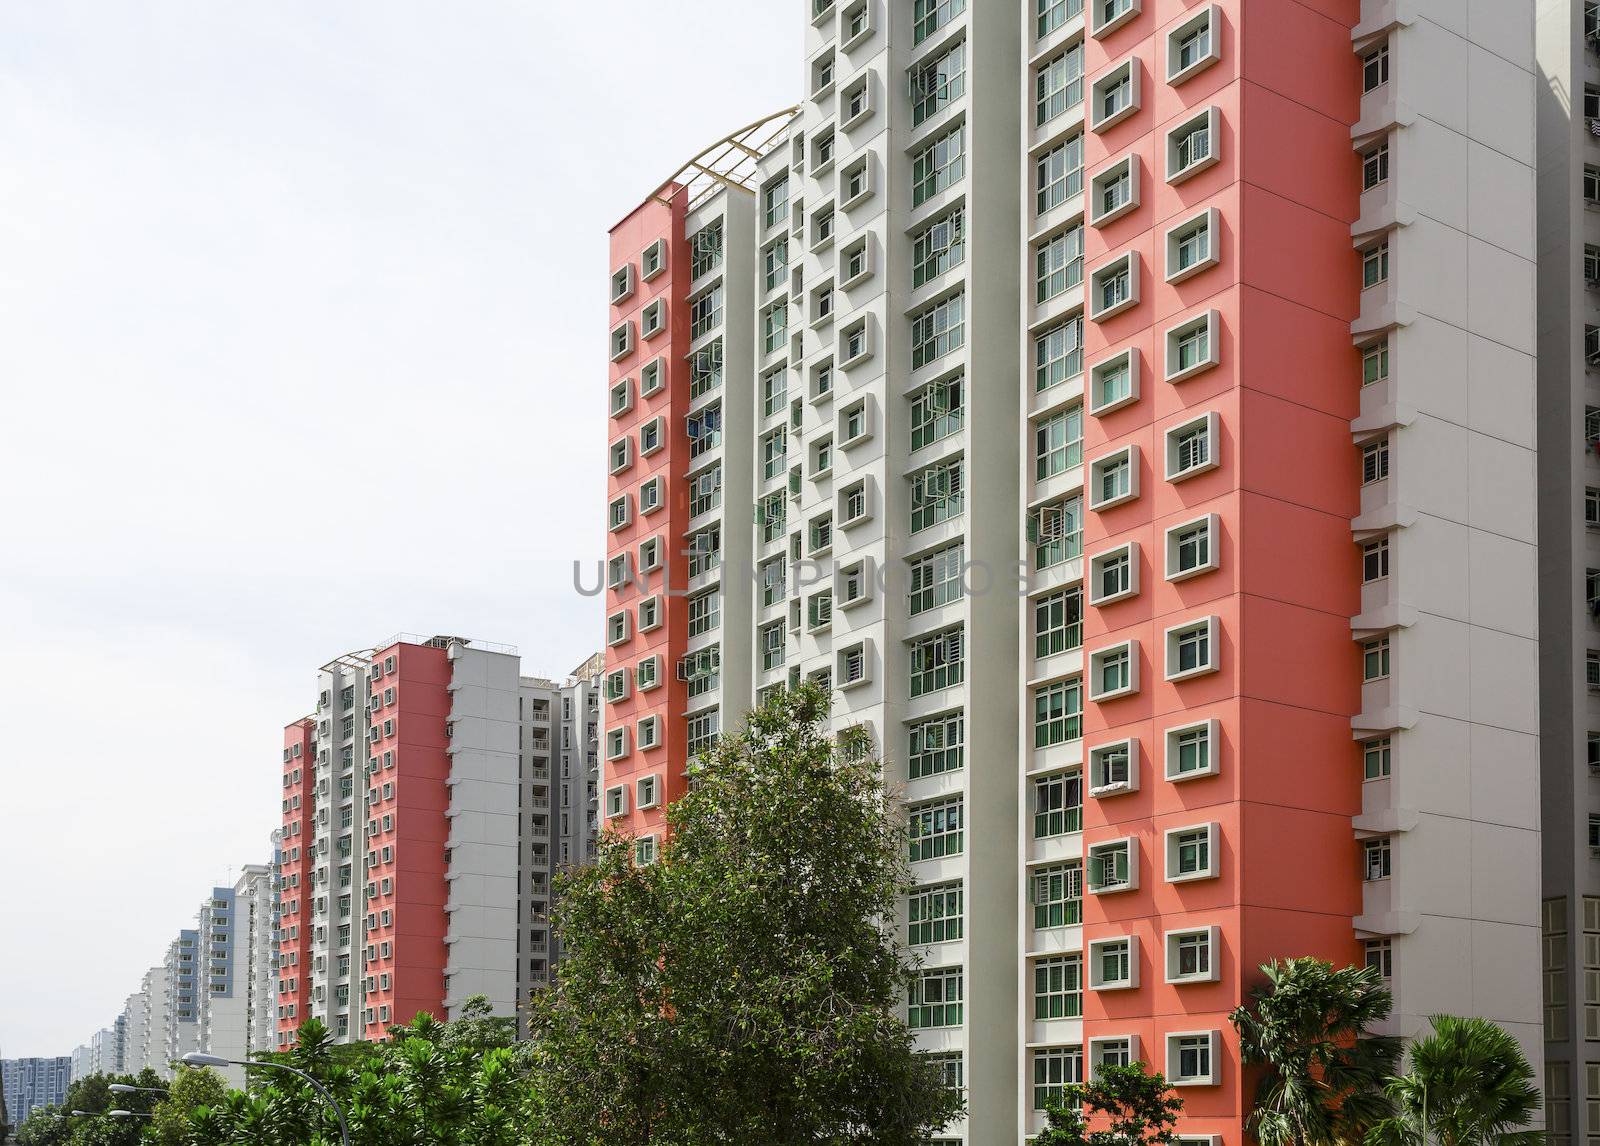 A row of red color housing apartment.